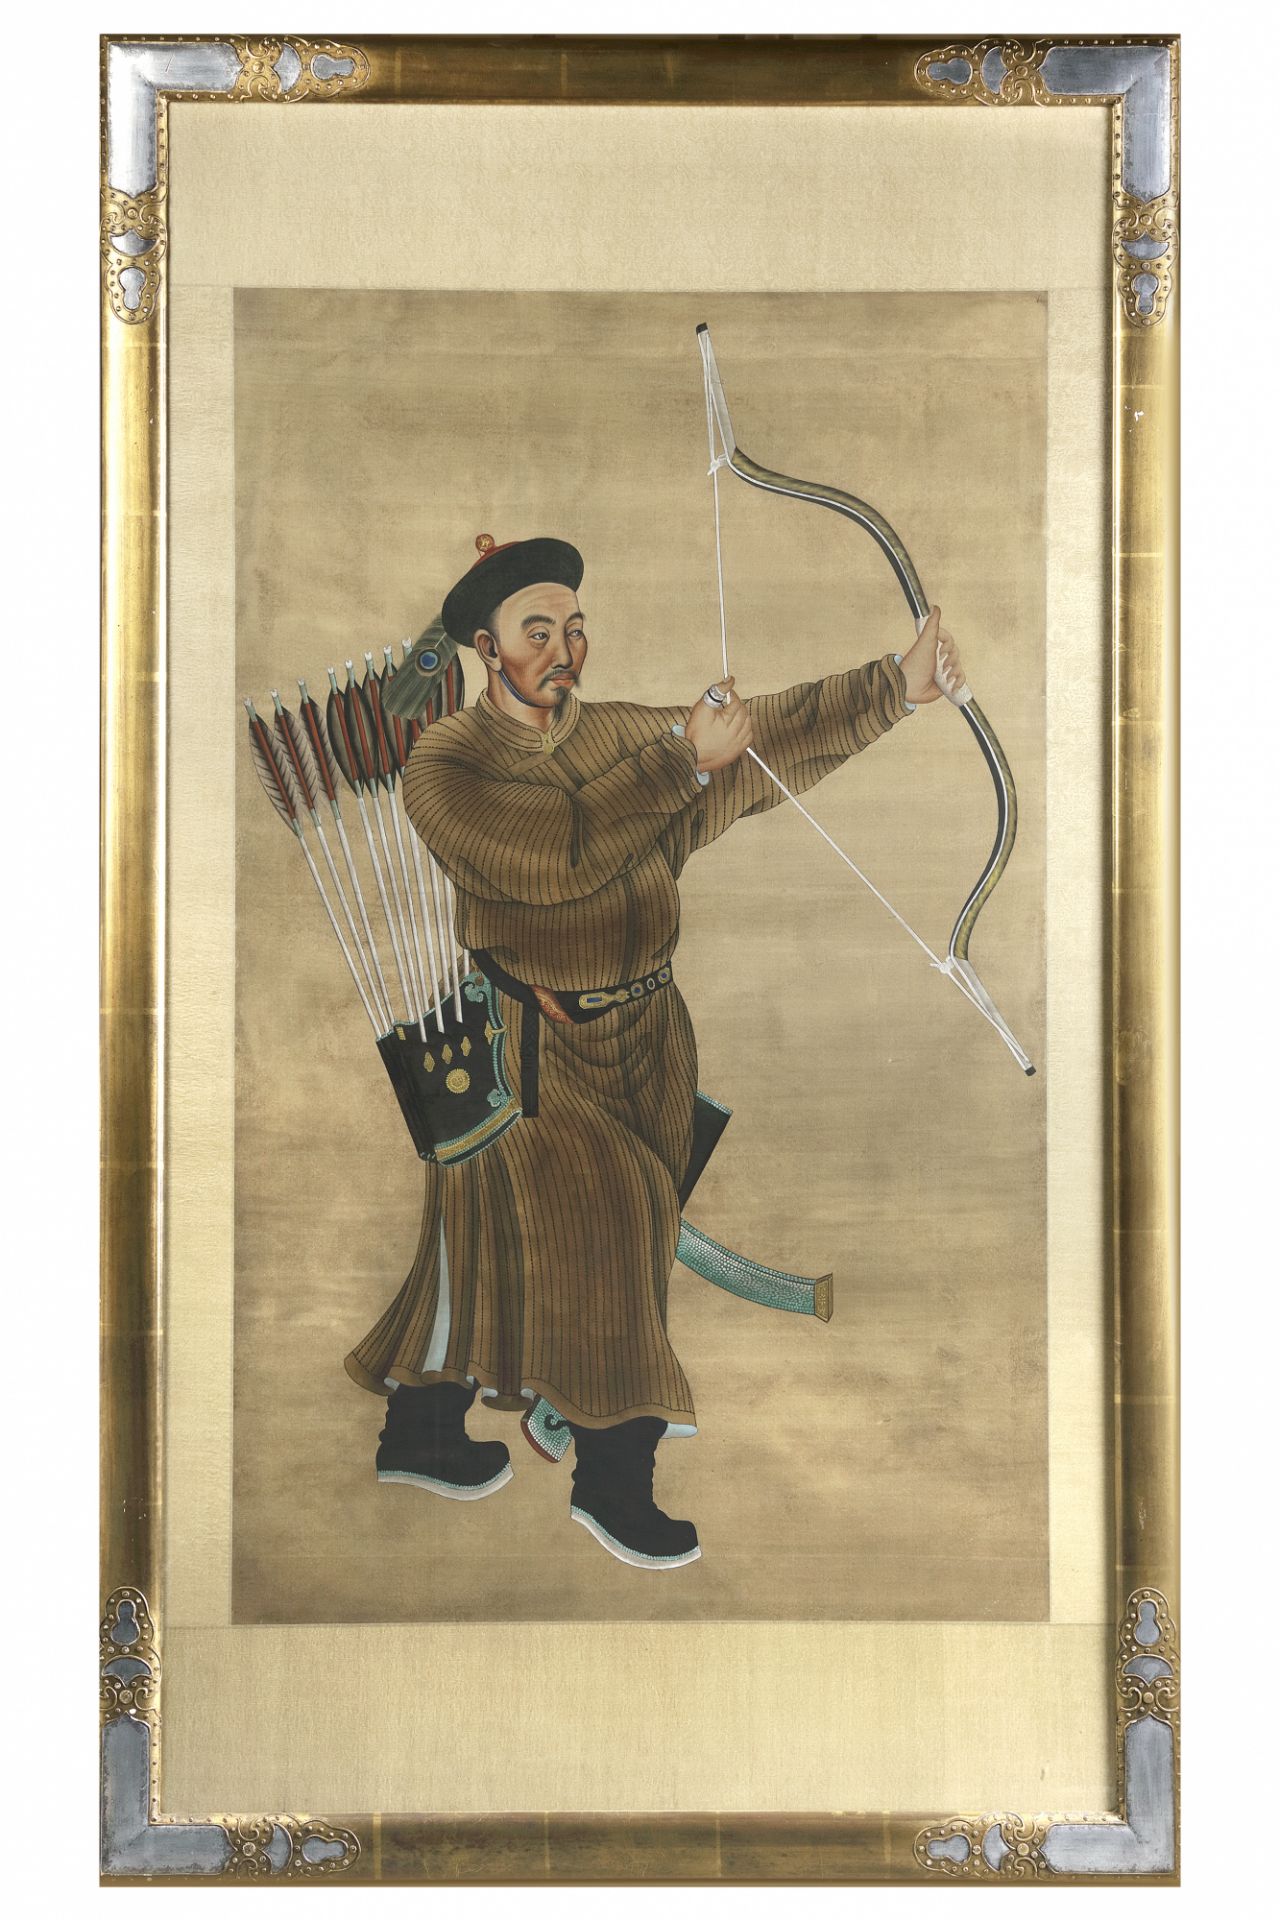 A LARGE CHINESE PAINTING OF AN MANCHU ARCHER, 19TH CENTURY